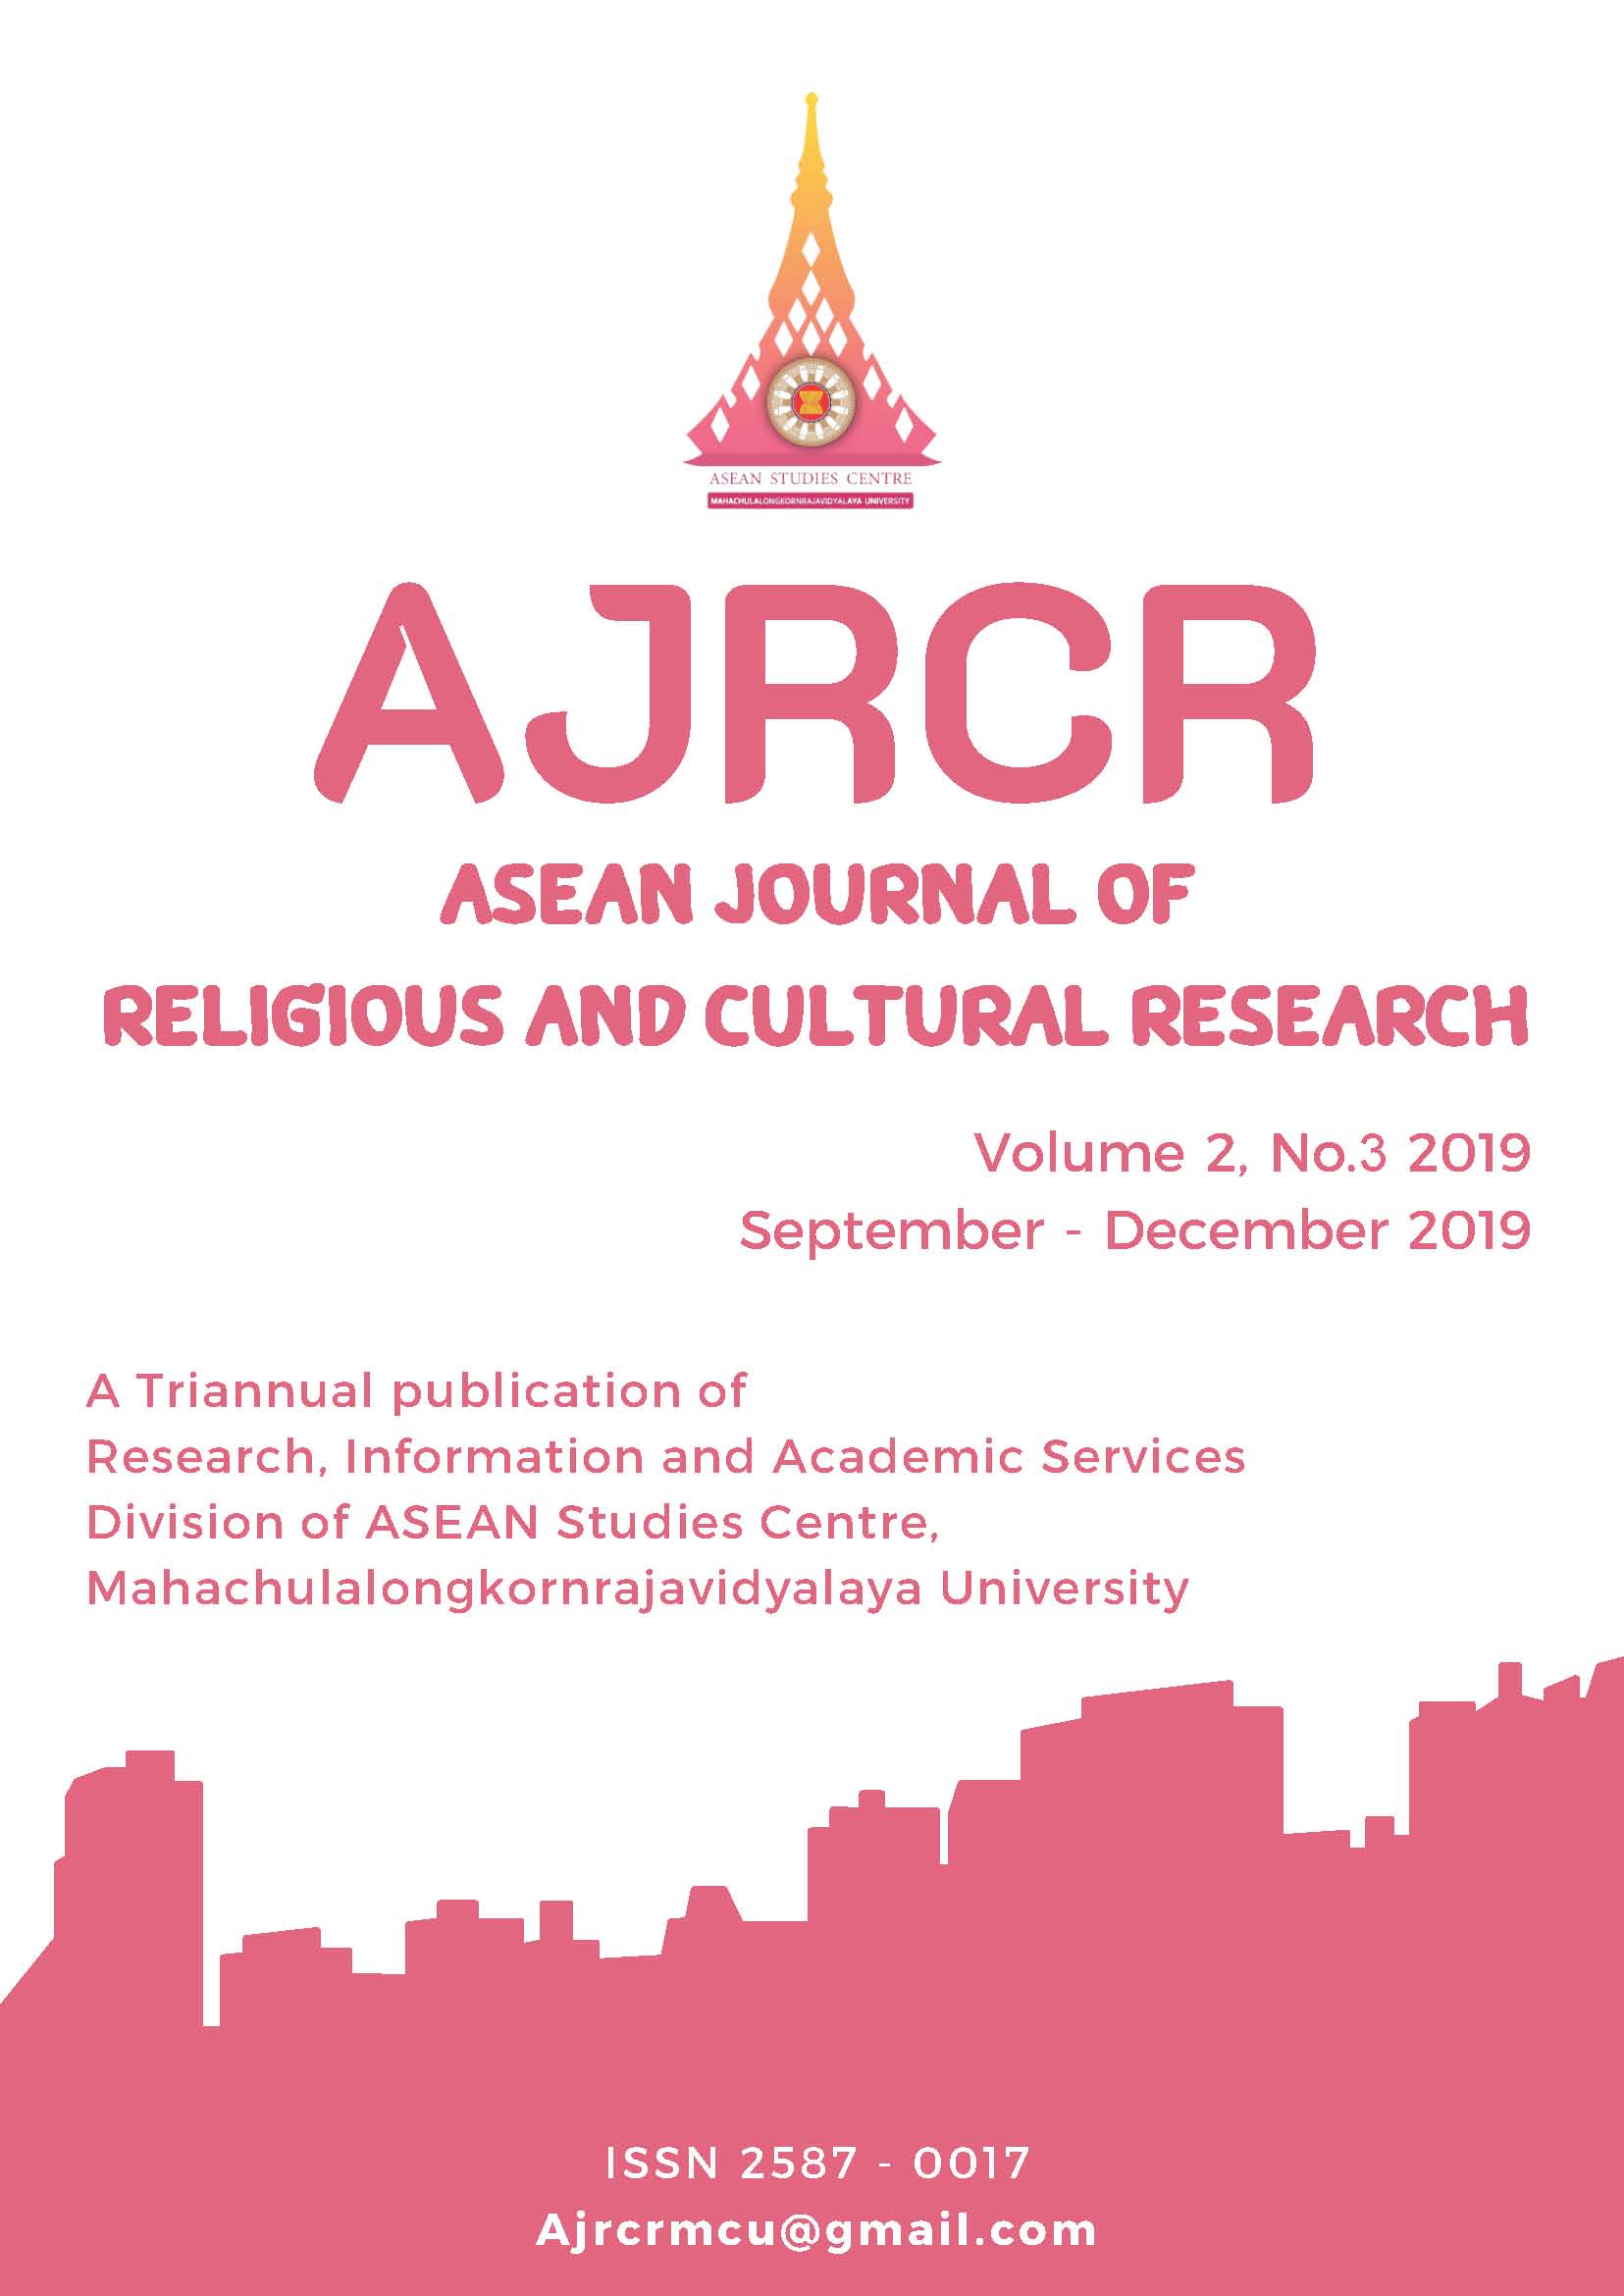 					View Vol. 2 No. 3 (2019): ASEAN Journal of Religious and Cultural Research (AJRCR)
				